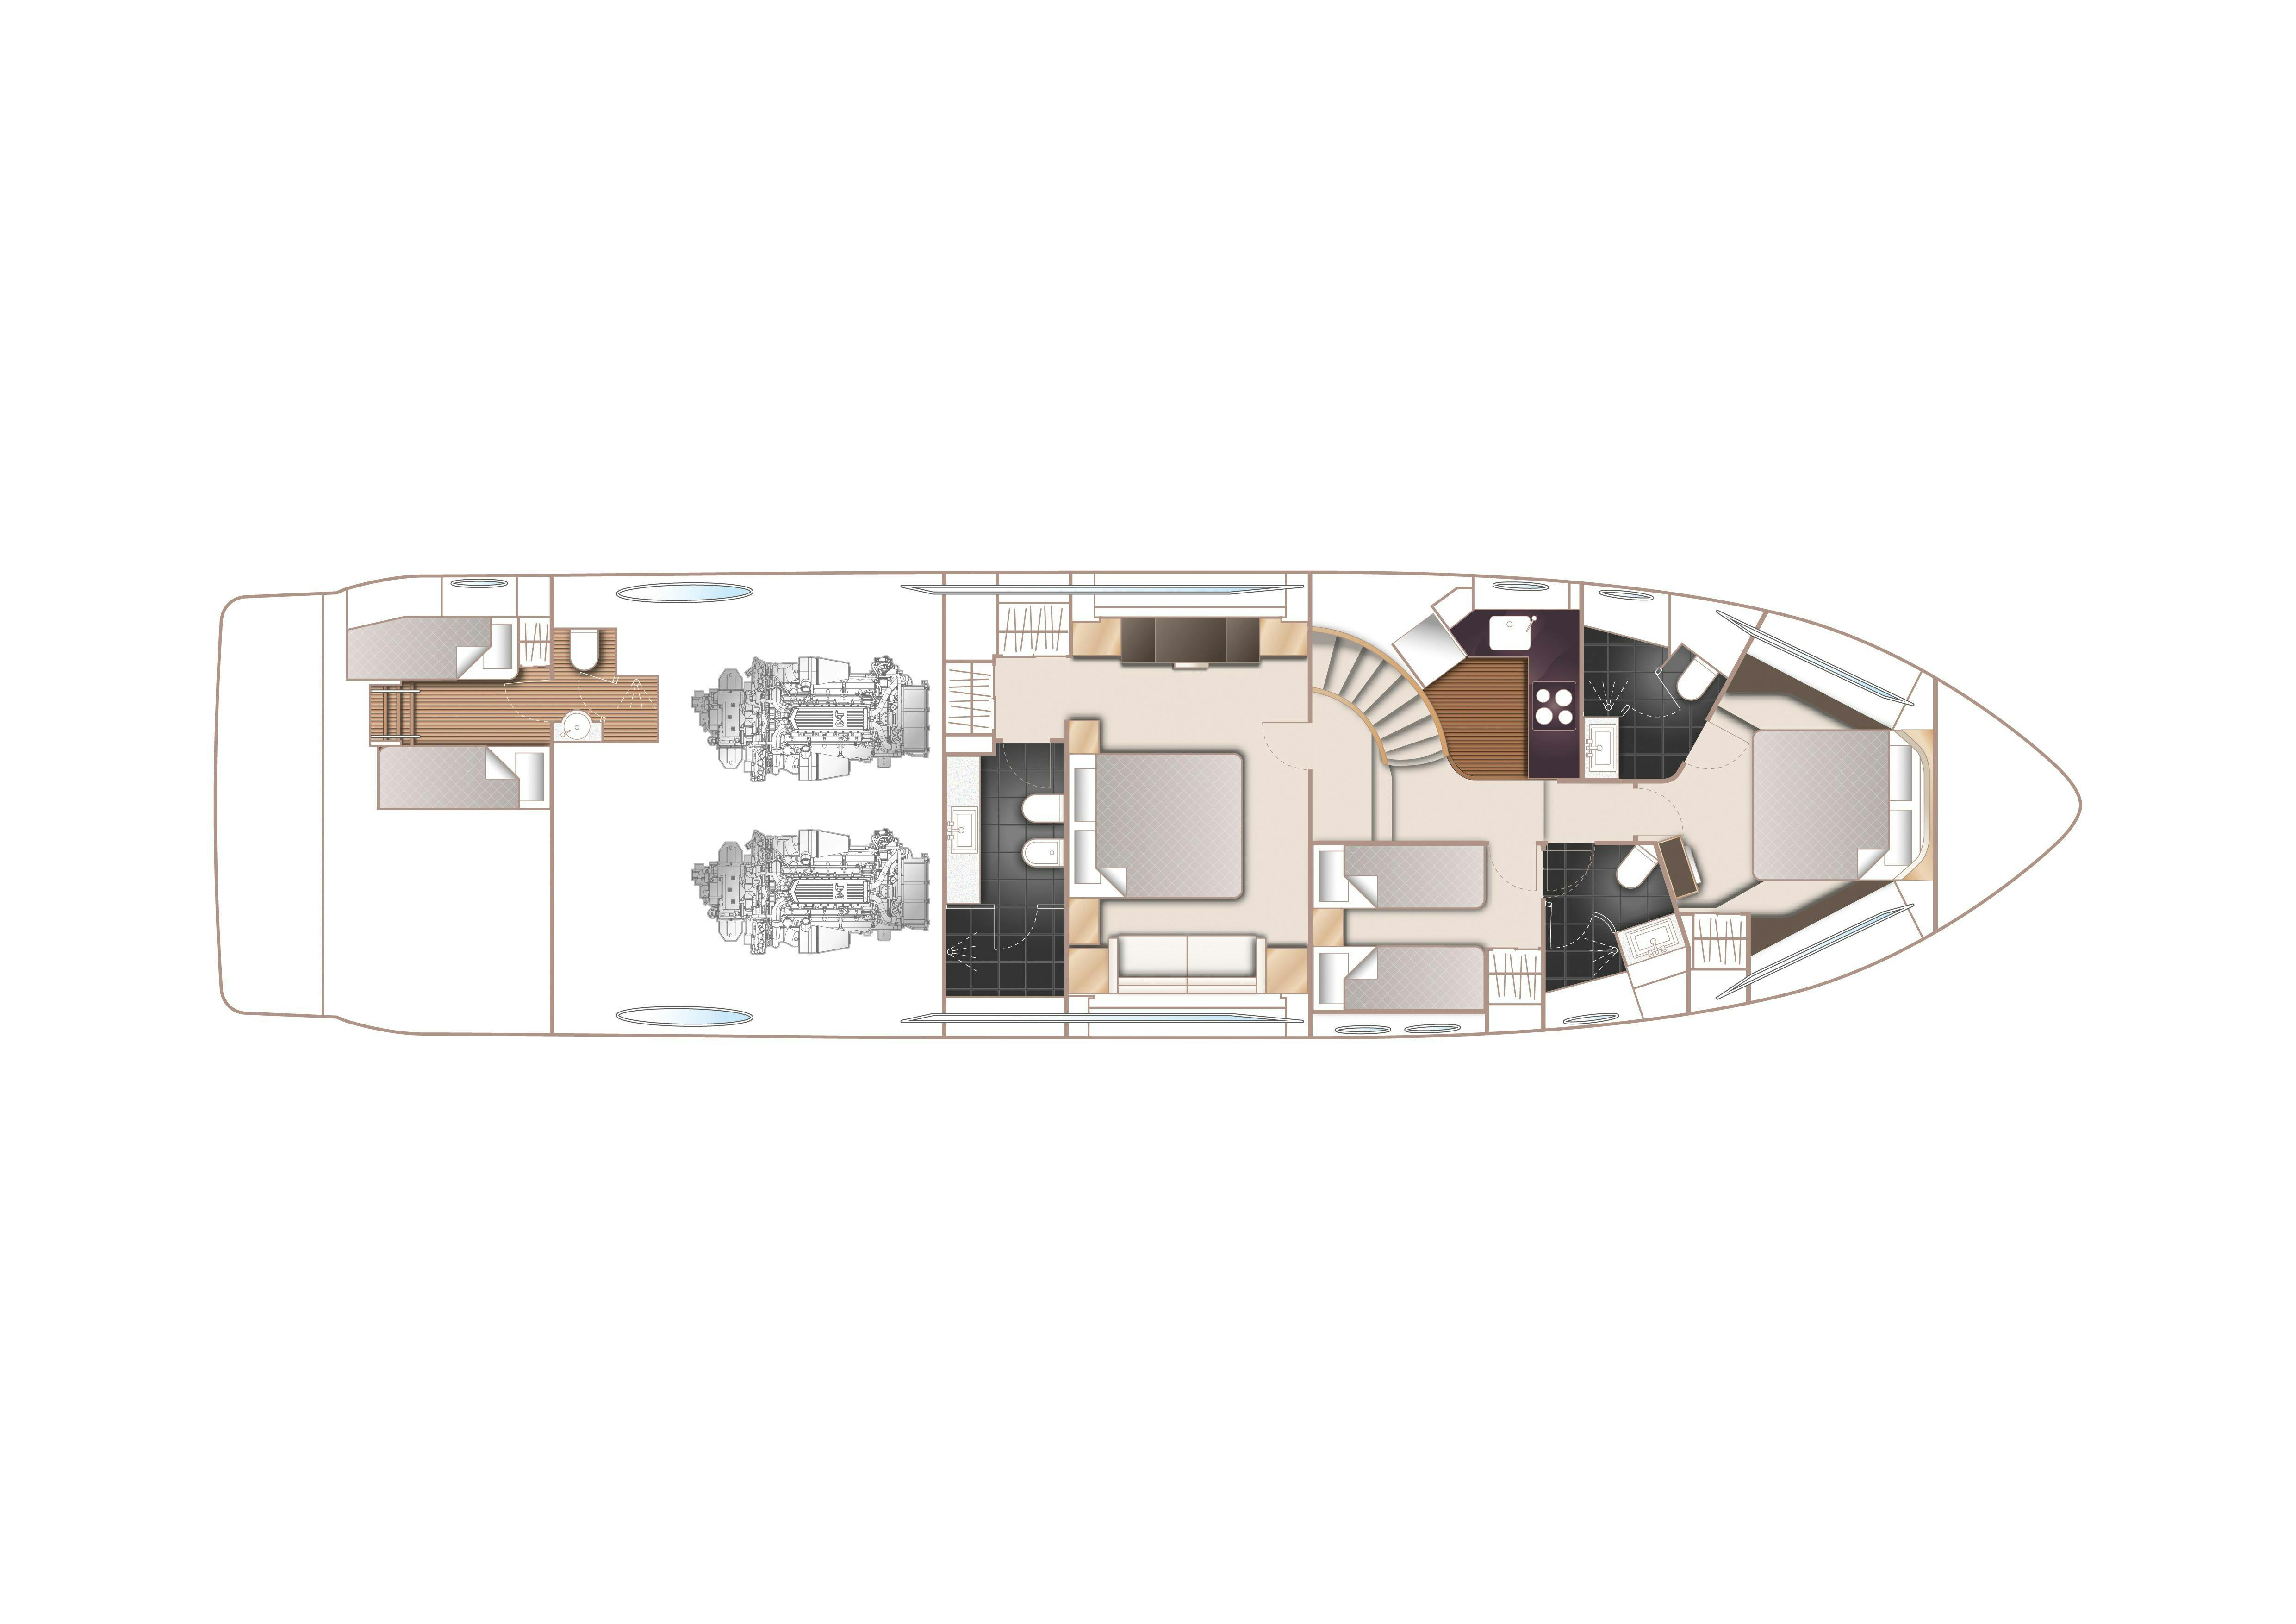 Manufacturer Provided Image: Princess S72 Lower Deck Layout Plan